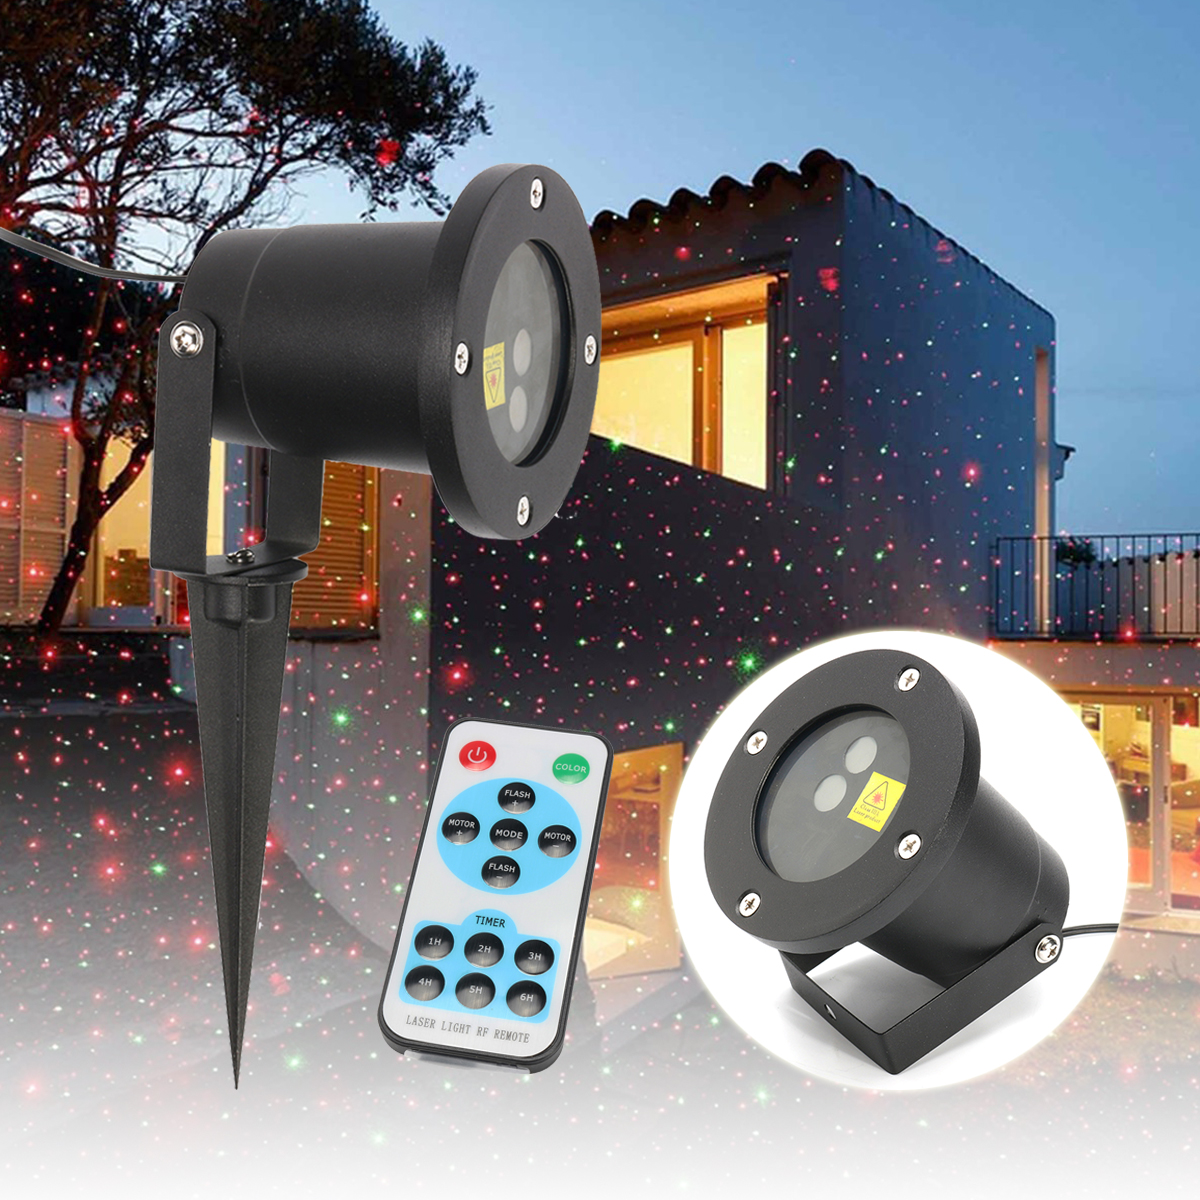 Christmas-Star-Projector-Stage-Light-Waterproof-RG-LED-Remote-Control-Outdoor-Landscape-Lamp-Christm-1345110-1